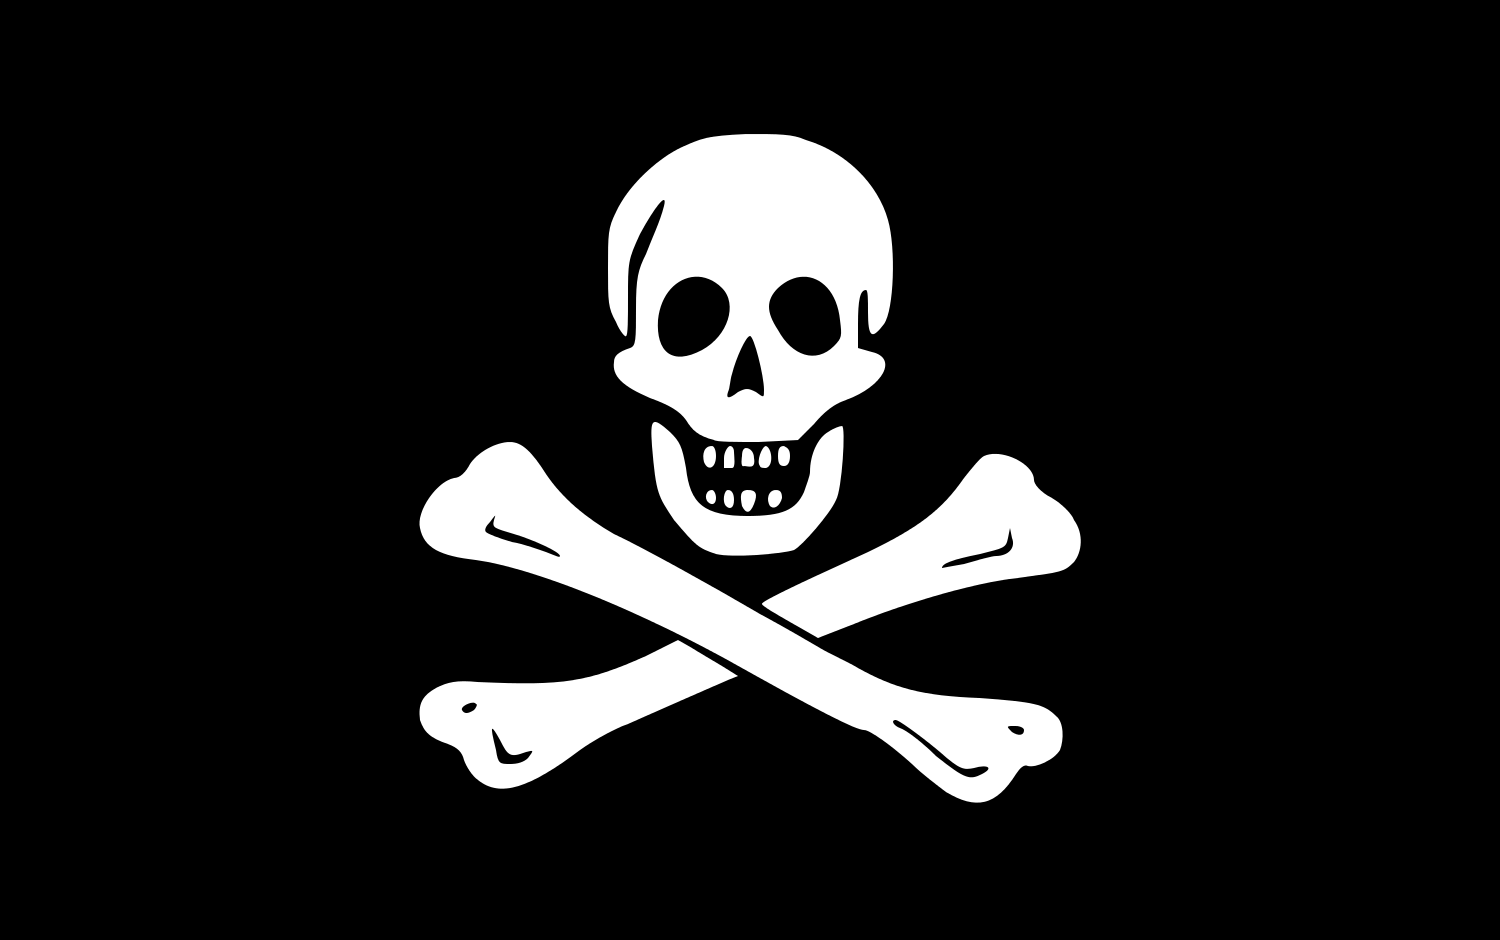 Where did the Jolly Roger come from?